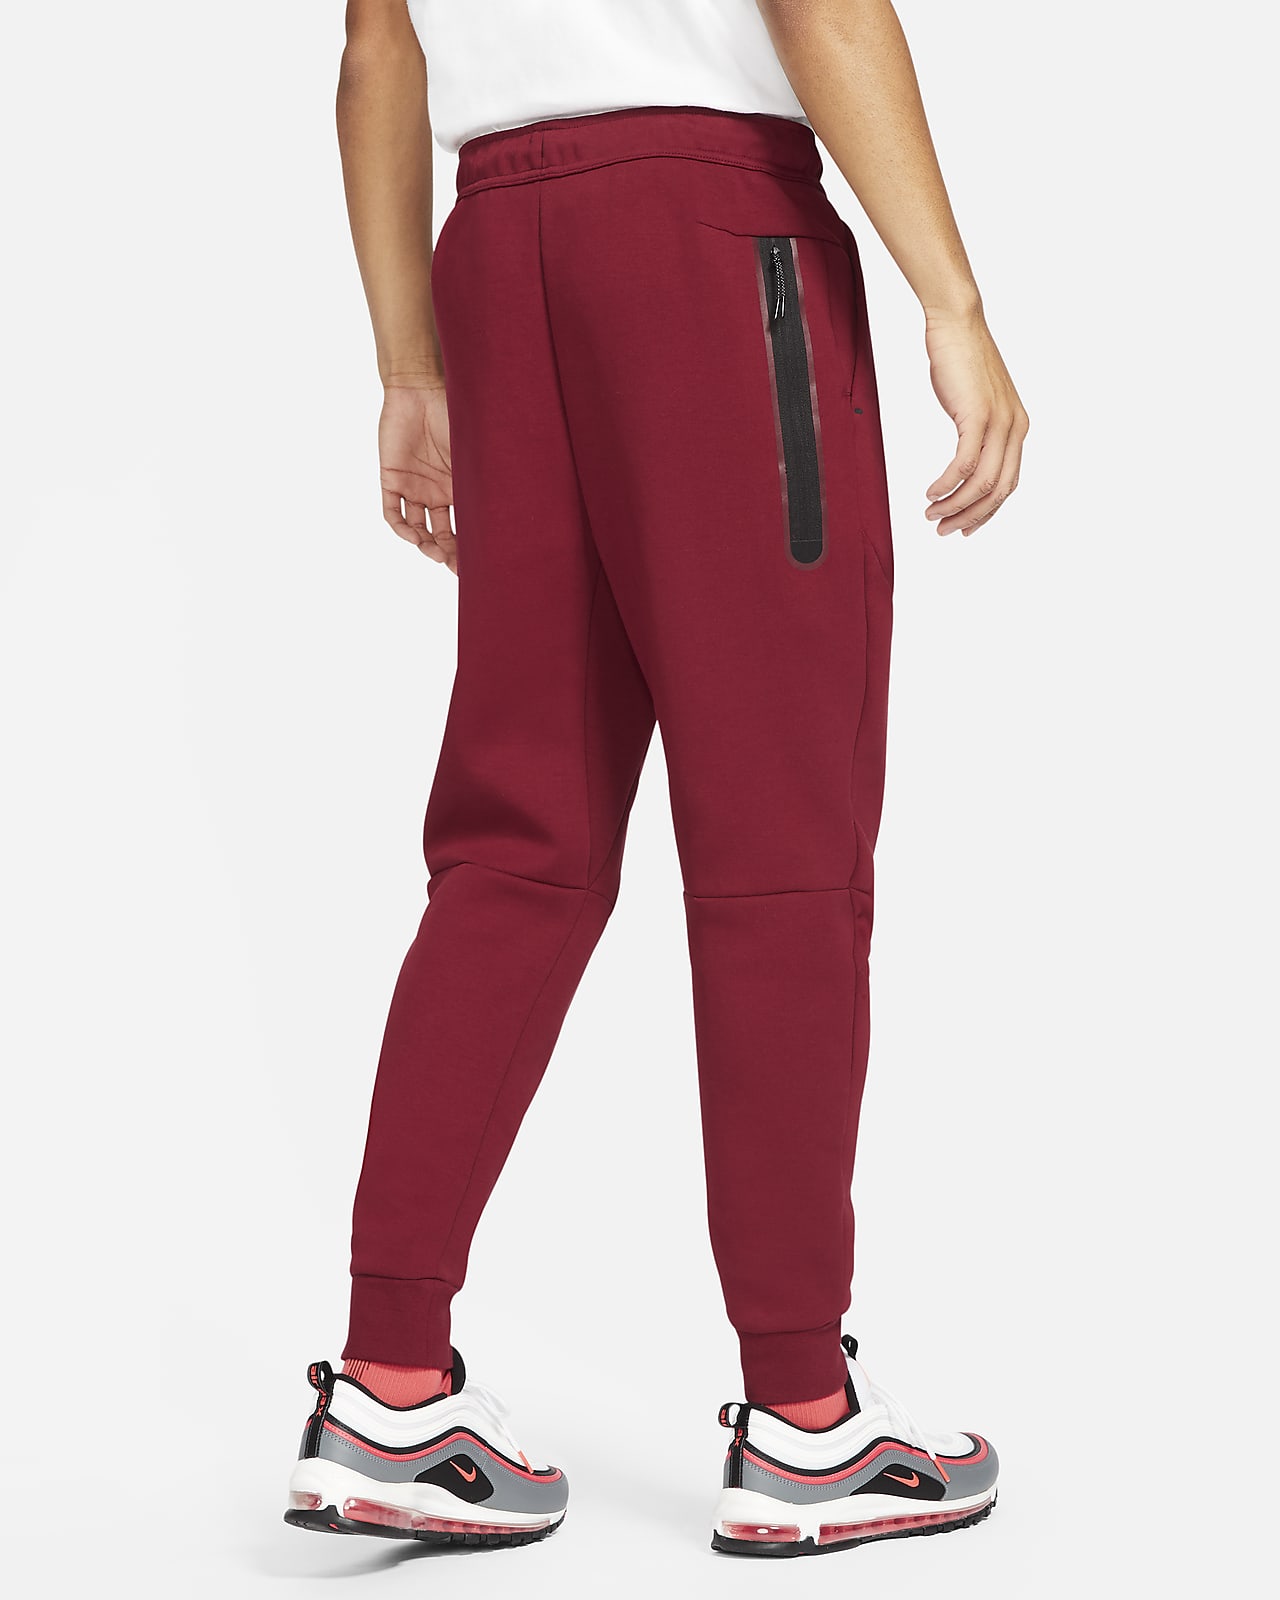 red nike mens joggers